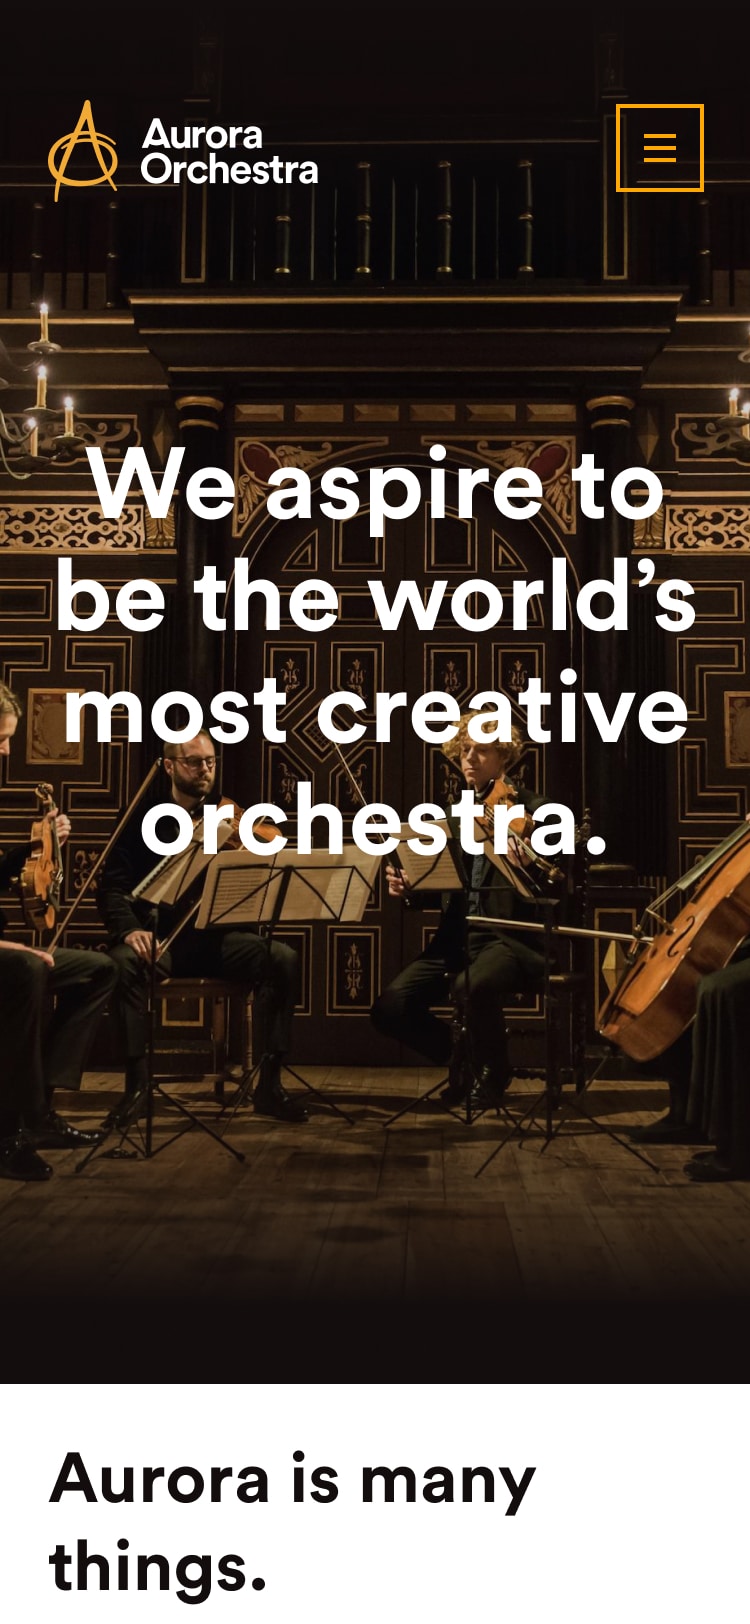 The about page of the Aurora site on a smartphone. There's a styled photo of a few performers in an oversized doll's house, with the text 'We aspire to be the world's most creative orchestra' overlaid.